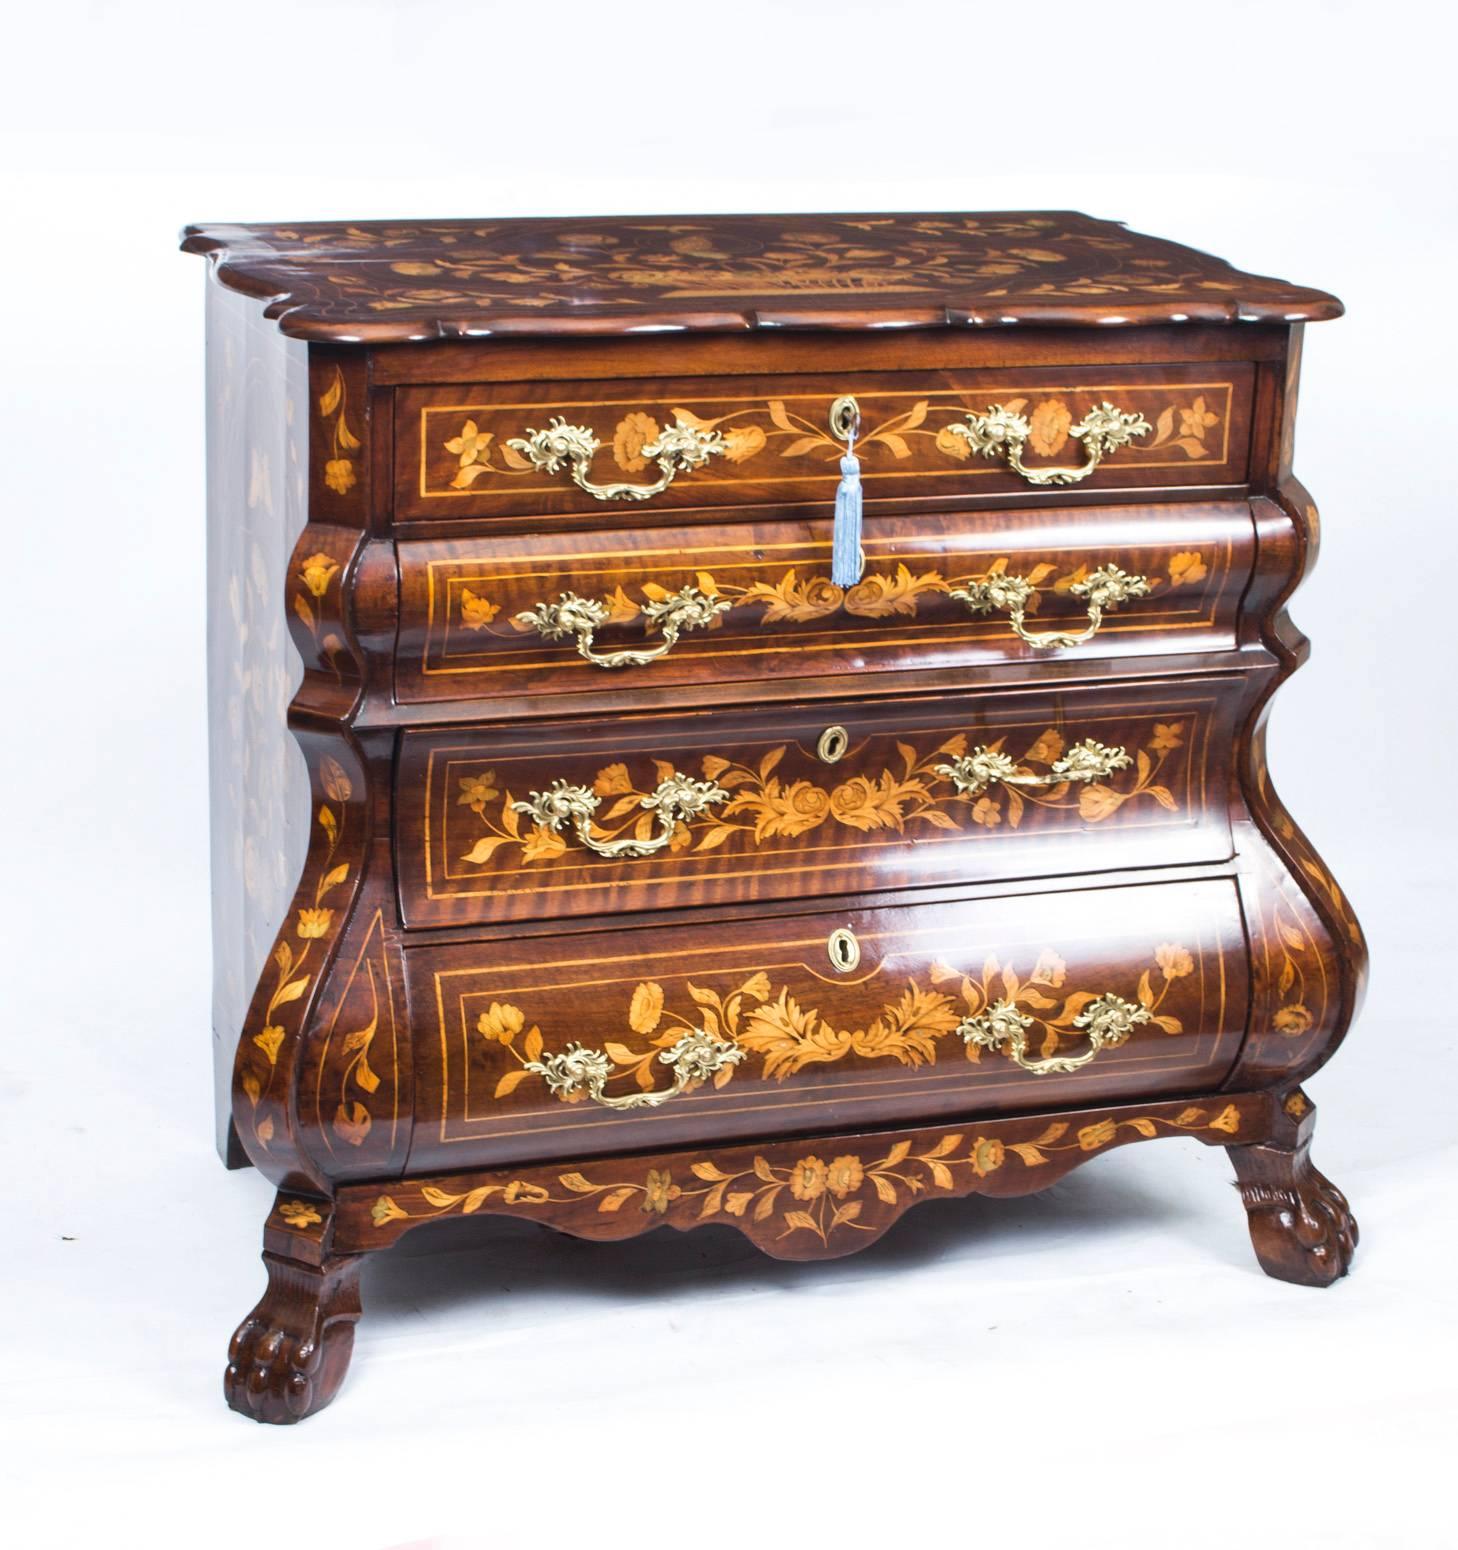 This is a stunning antique Dutch bombe' serpentine fronted marquetry chest of drawers, circa 1770 in date.

It has been accomplished in burr walnut with exquisite hand-cut walnut, boxwood and fruitwood floral marquetry typical of the